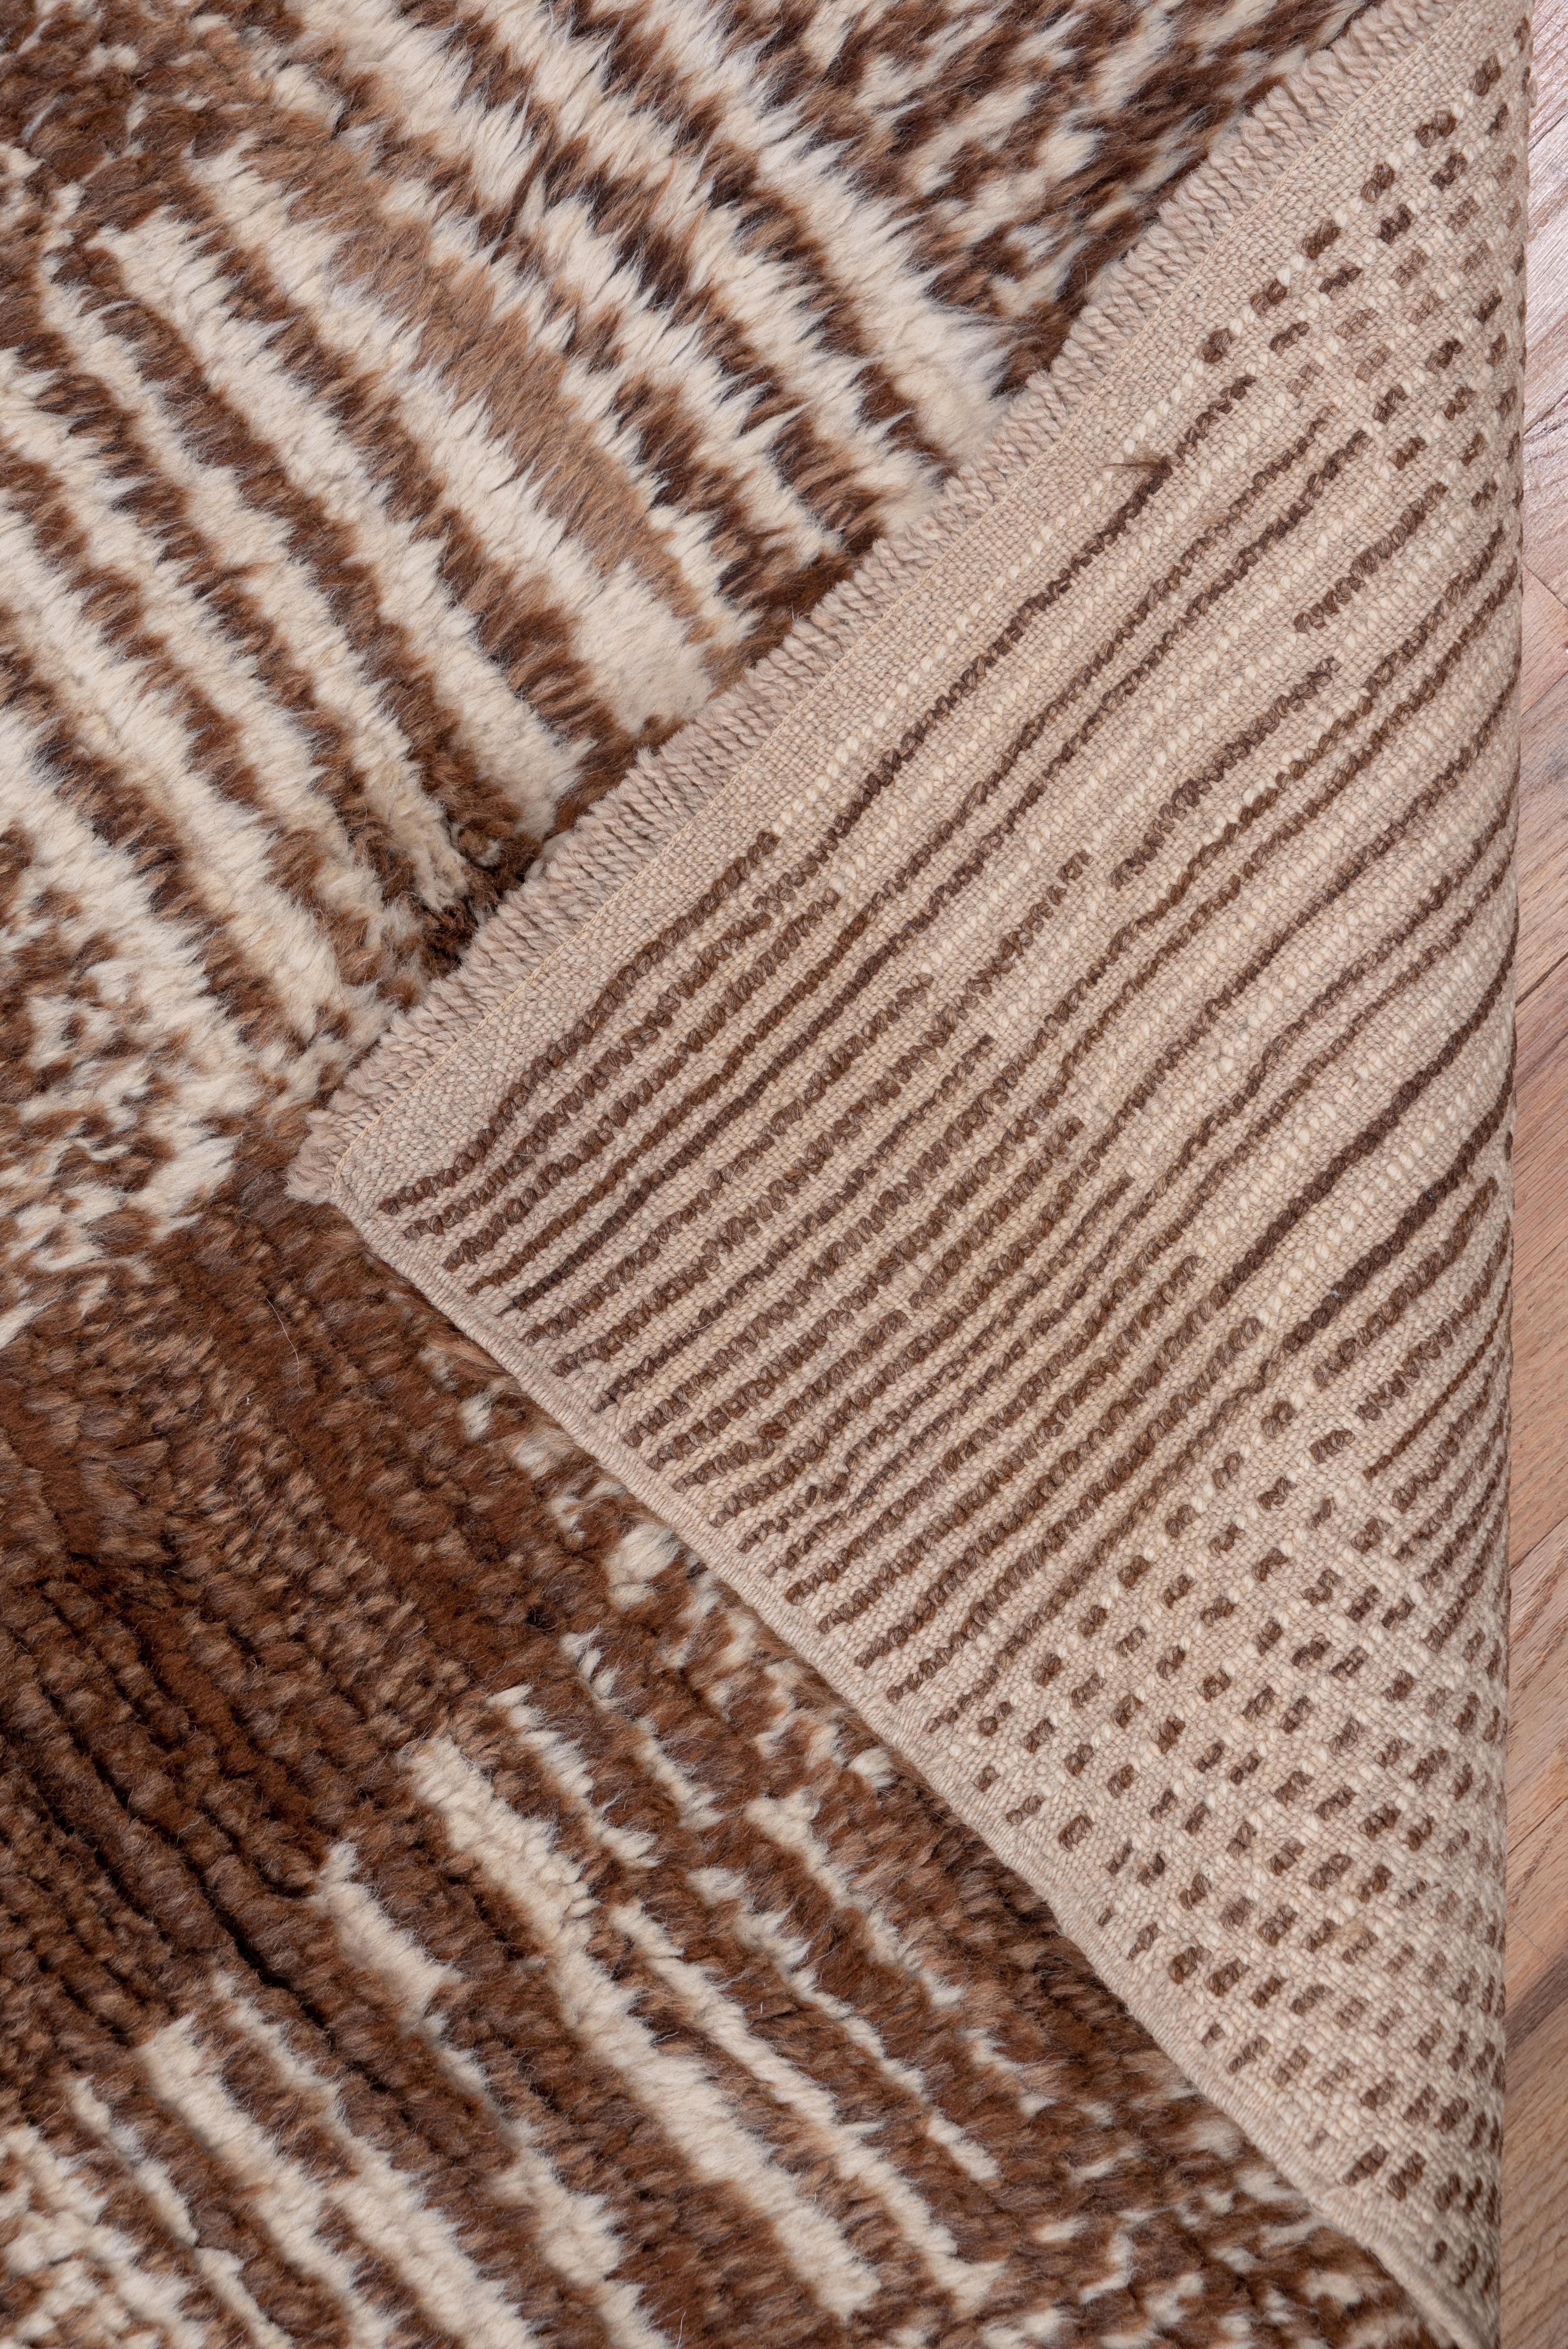 A five column patchwork square pattern in solid brown, as well as vertically and horizontally lined, speckled and diagonally lined has a vaguely rustic hooked rug aura.